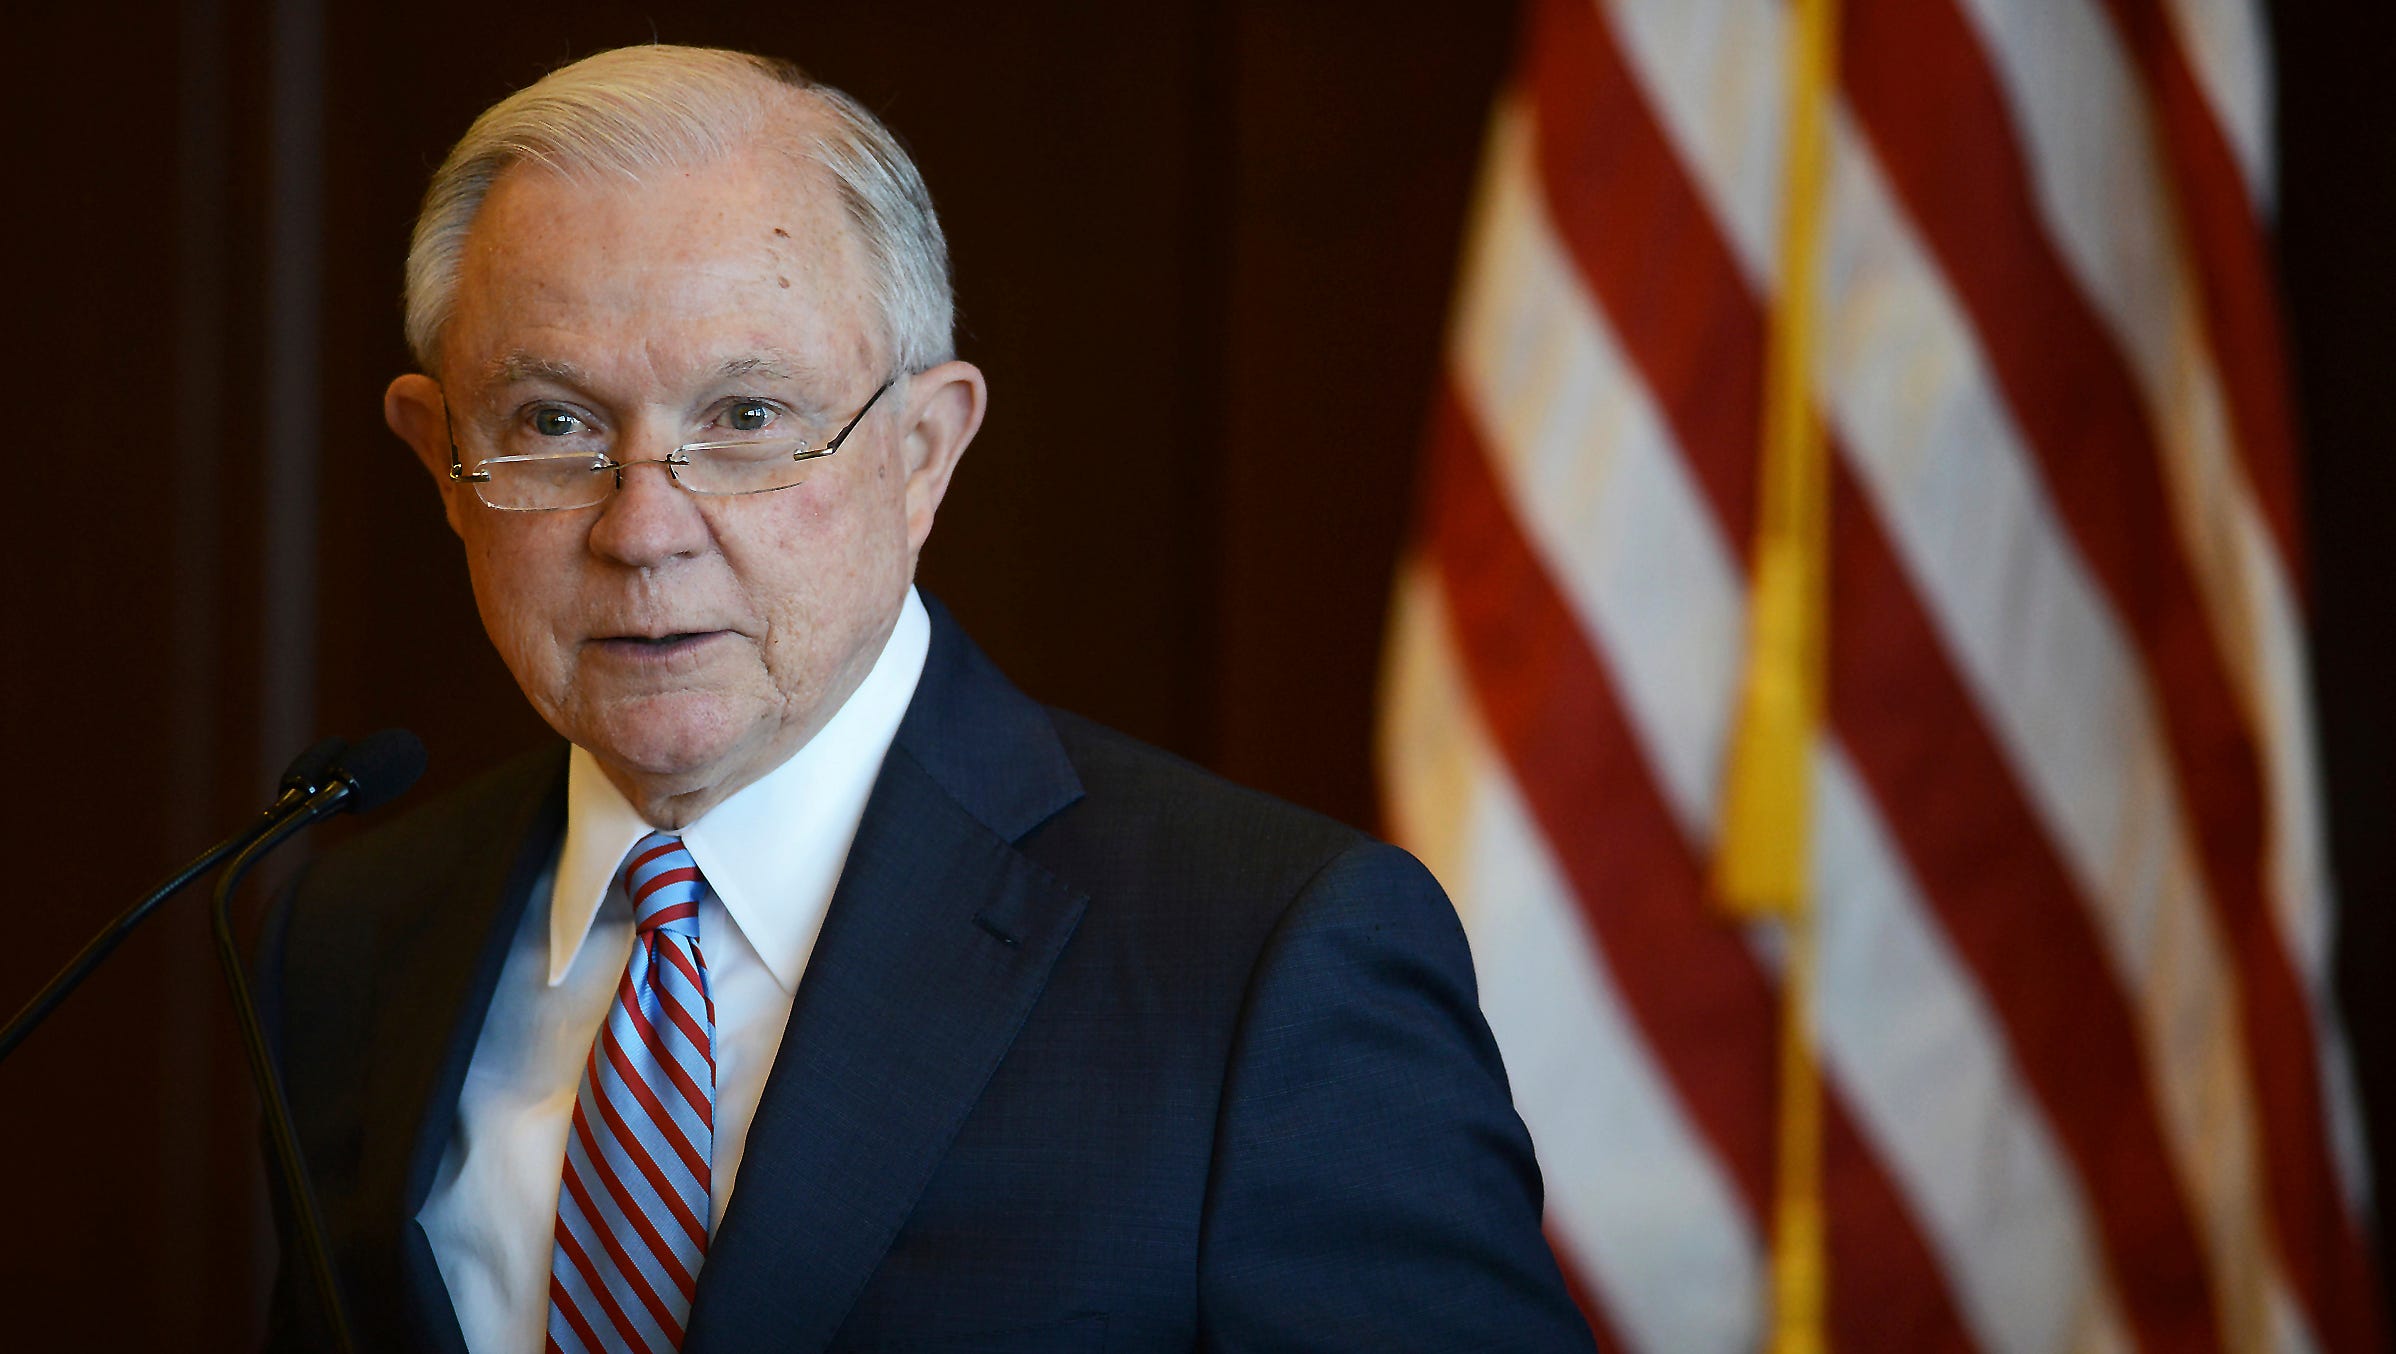 Jeff Sessions: We don’t want to separate parents from kids